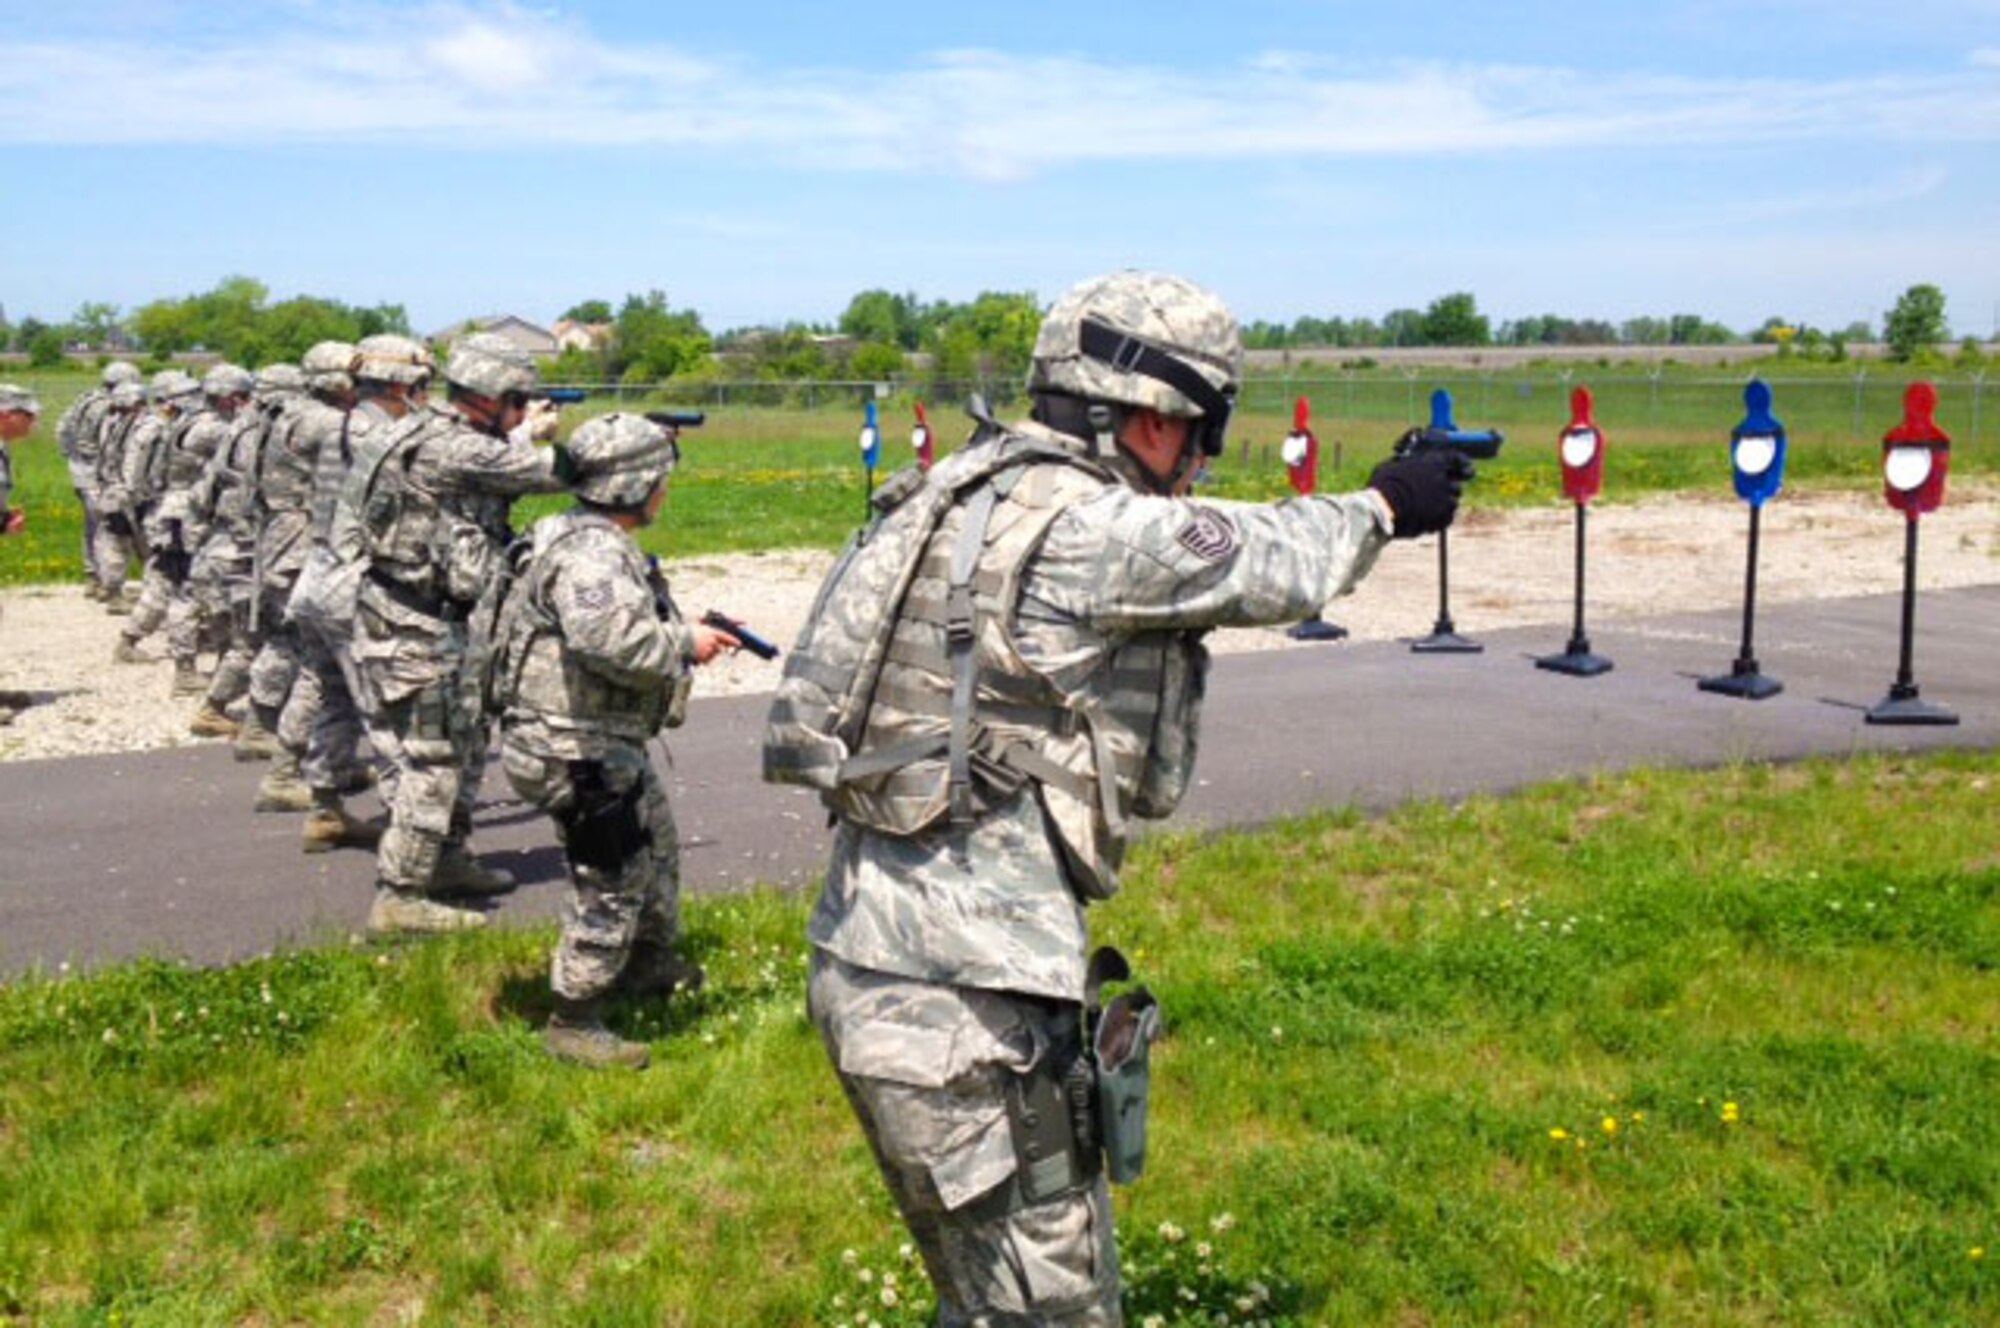 Members of the 914th Security Forces Squadron practice firing techniques at Niagara Falls Air Reserve Station on June 9, 2014. Personnel were utilizing the Combat Pistol Course here. (U.S. Air Force photo by 1st Lt. Brian Rhoney)